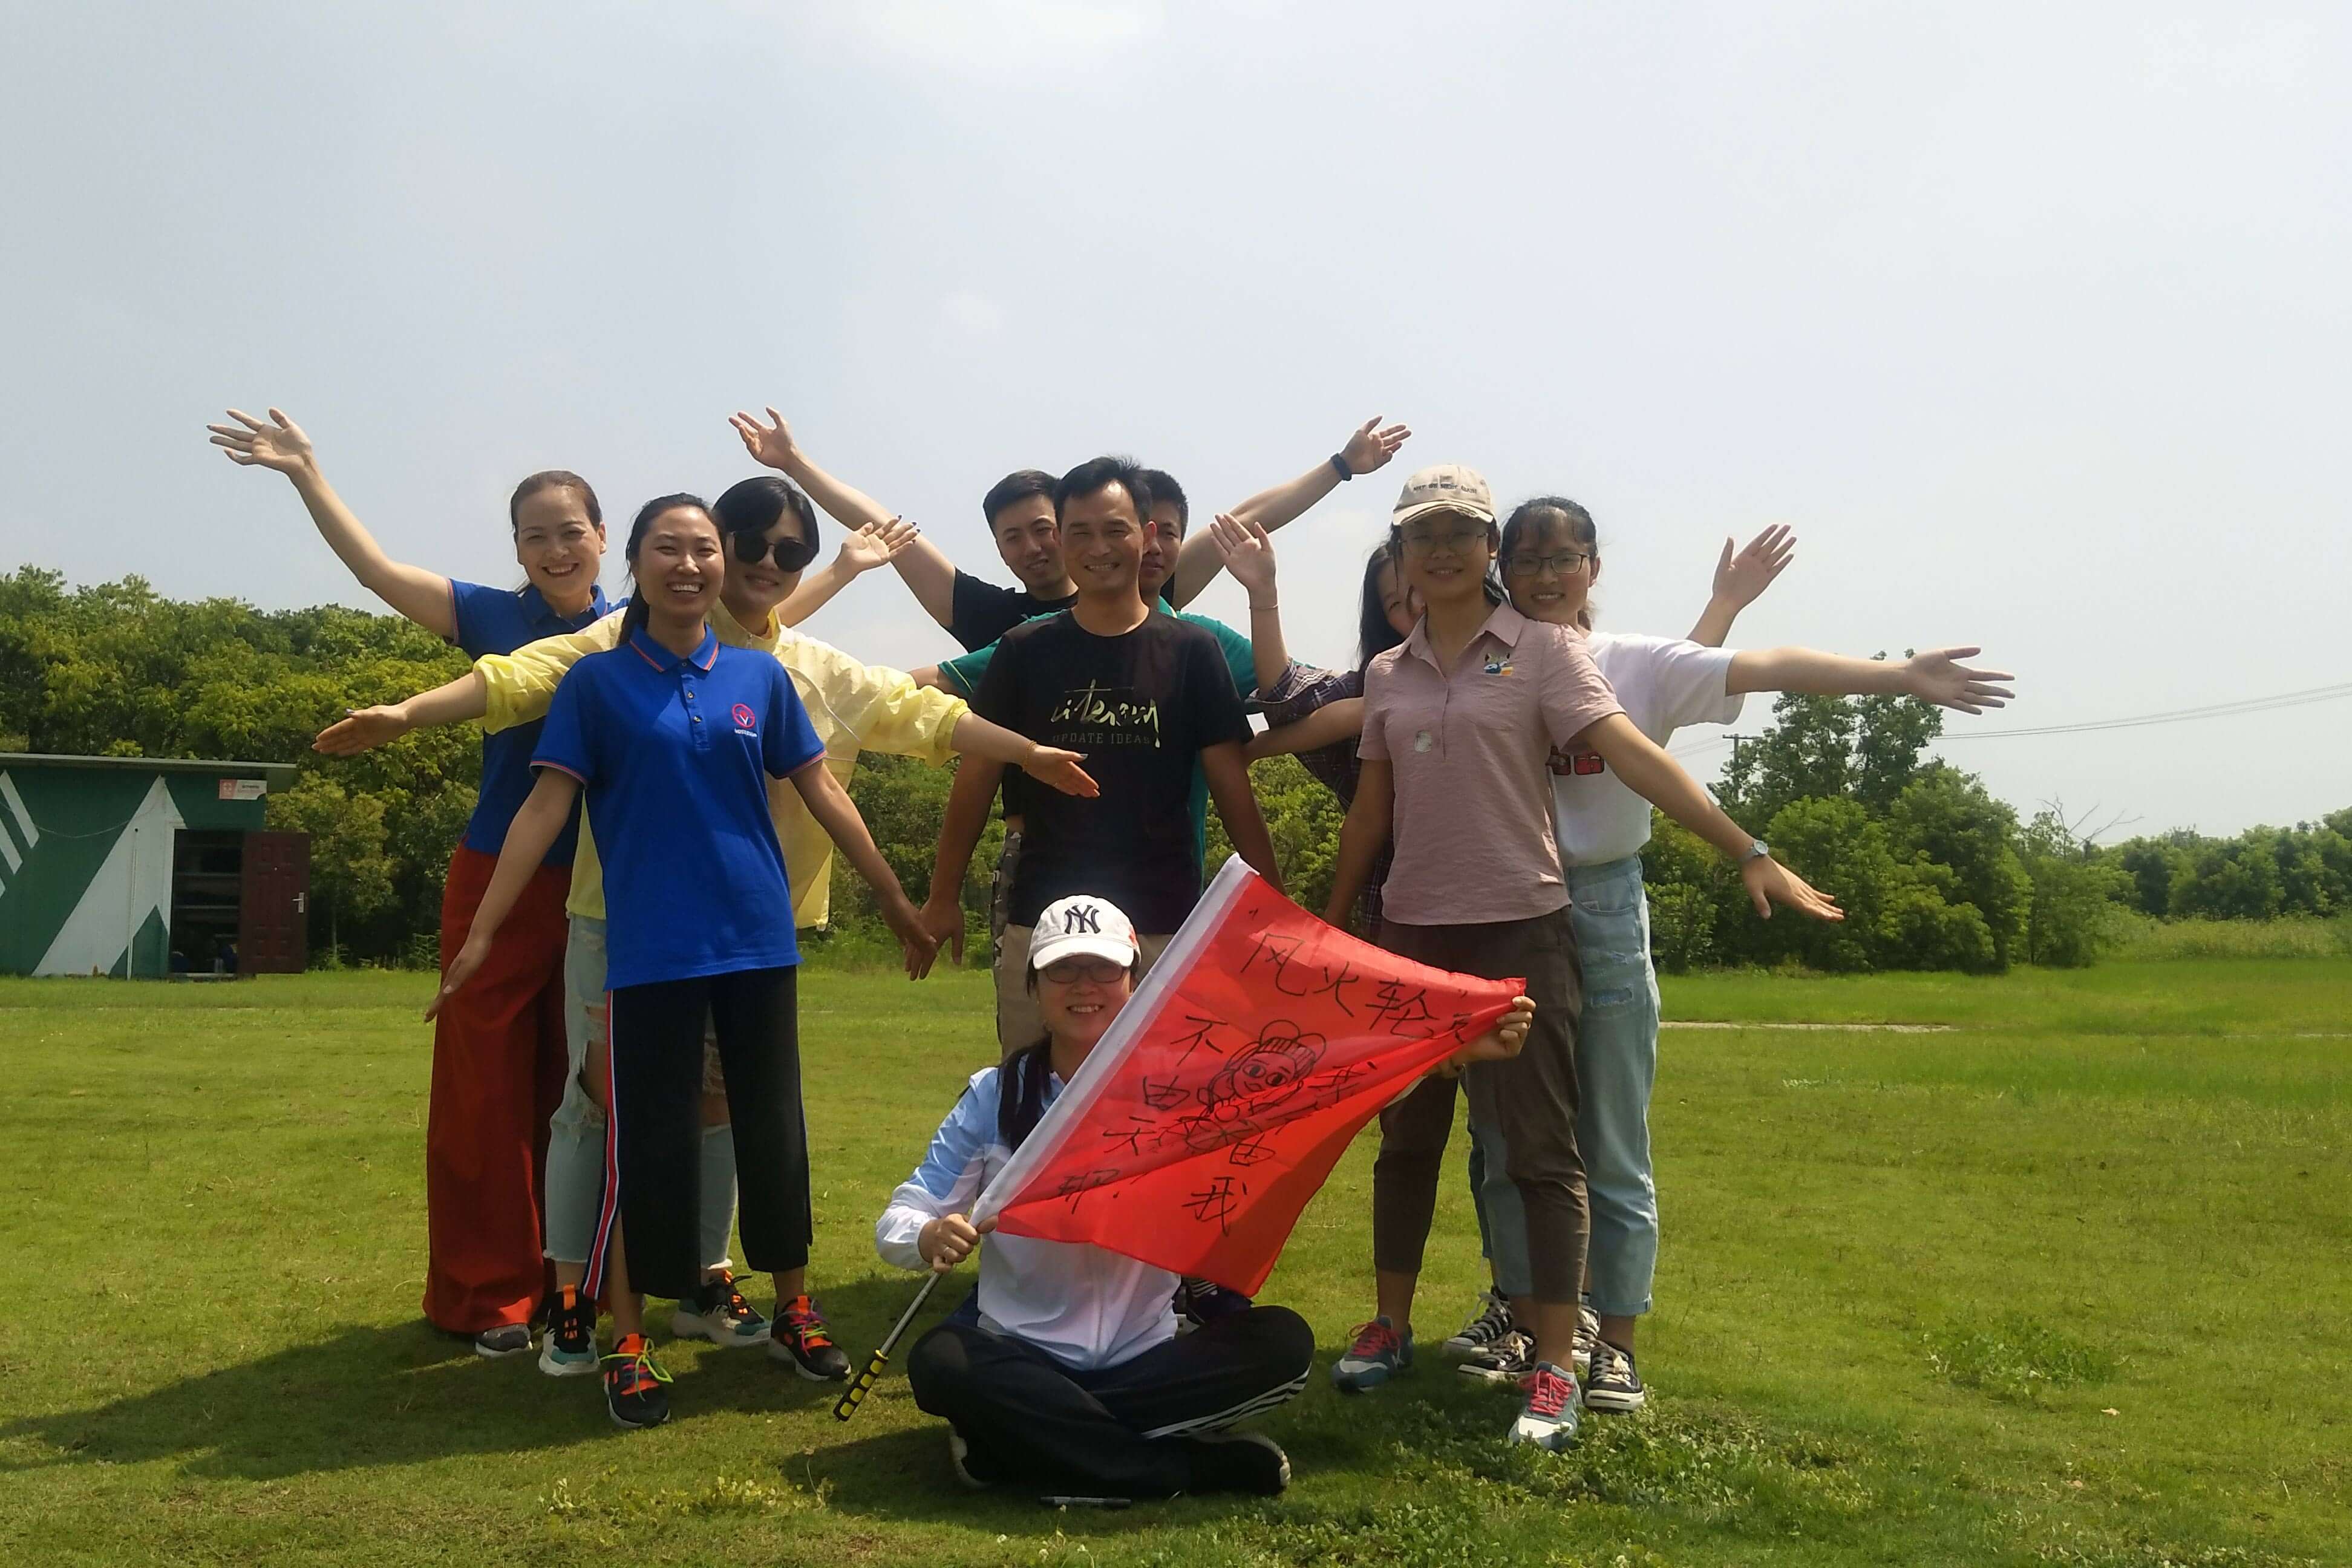 On August 30, 2019, we held a team building event.